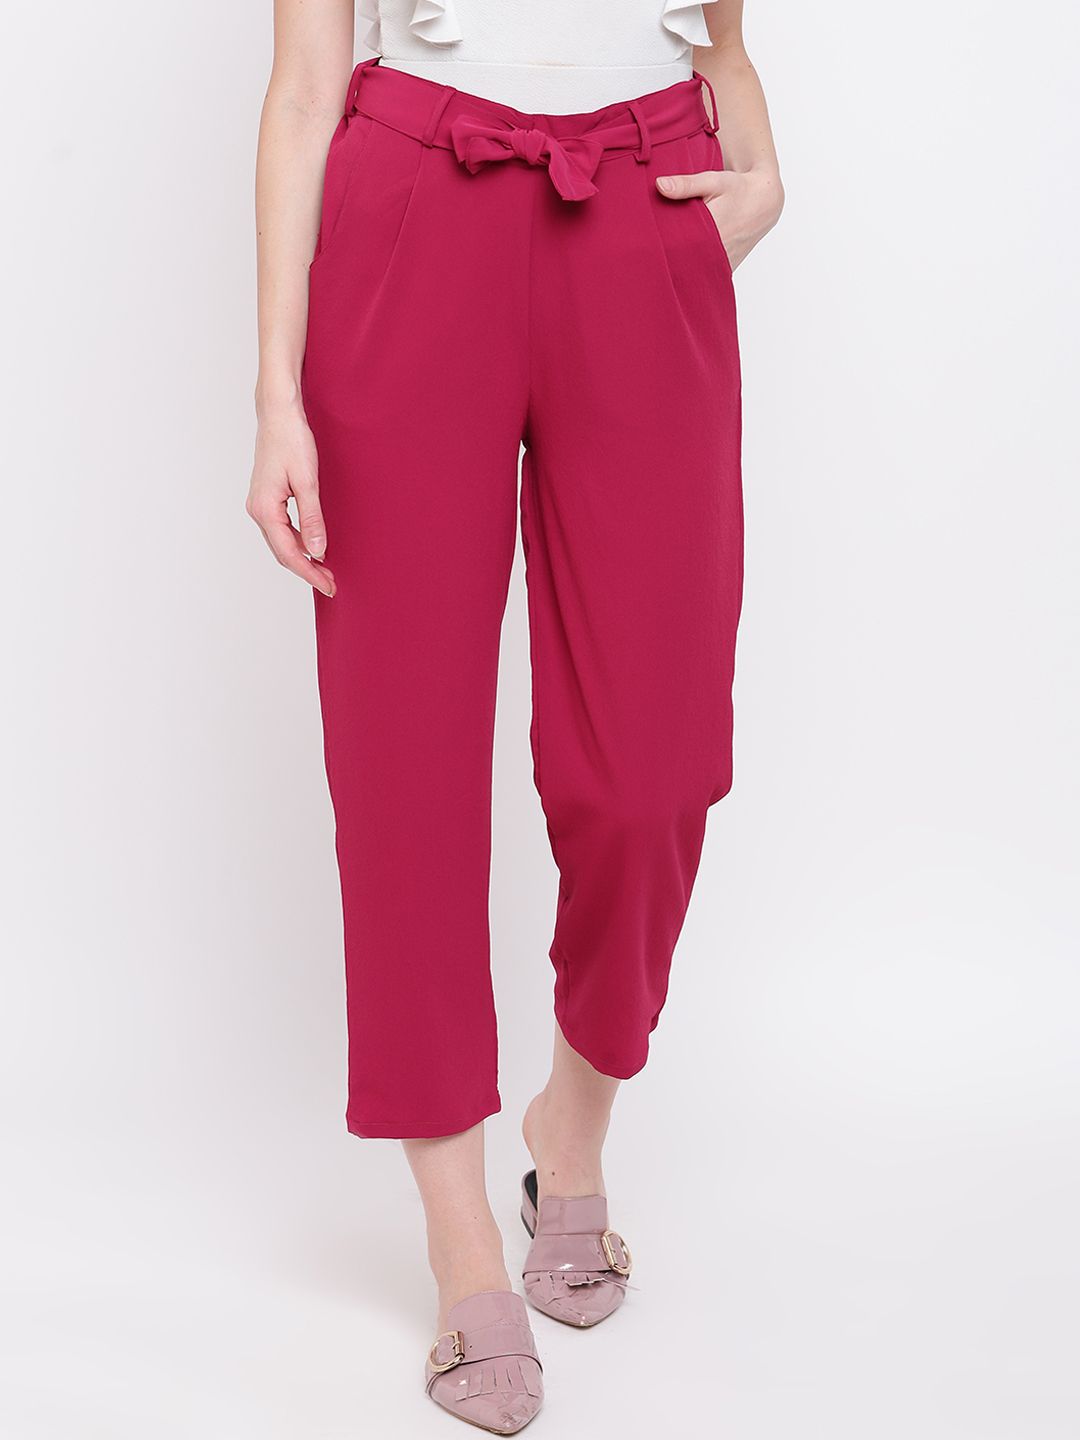 Mayra Women Fuchsia Pink Regular Fit Solid Peg Trousers Price in India